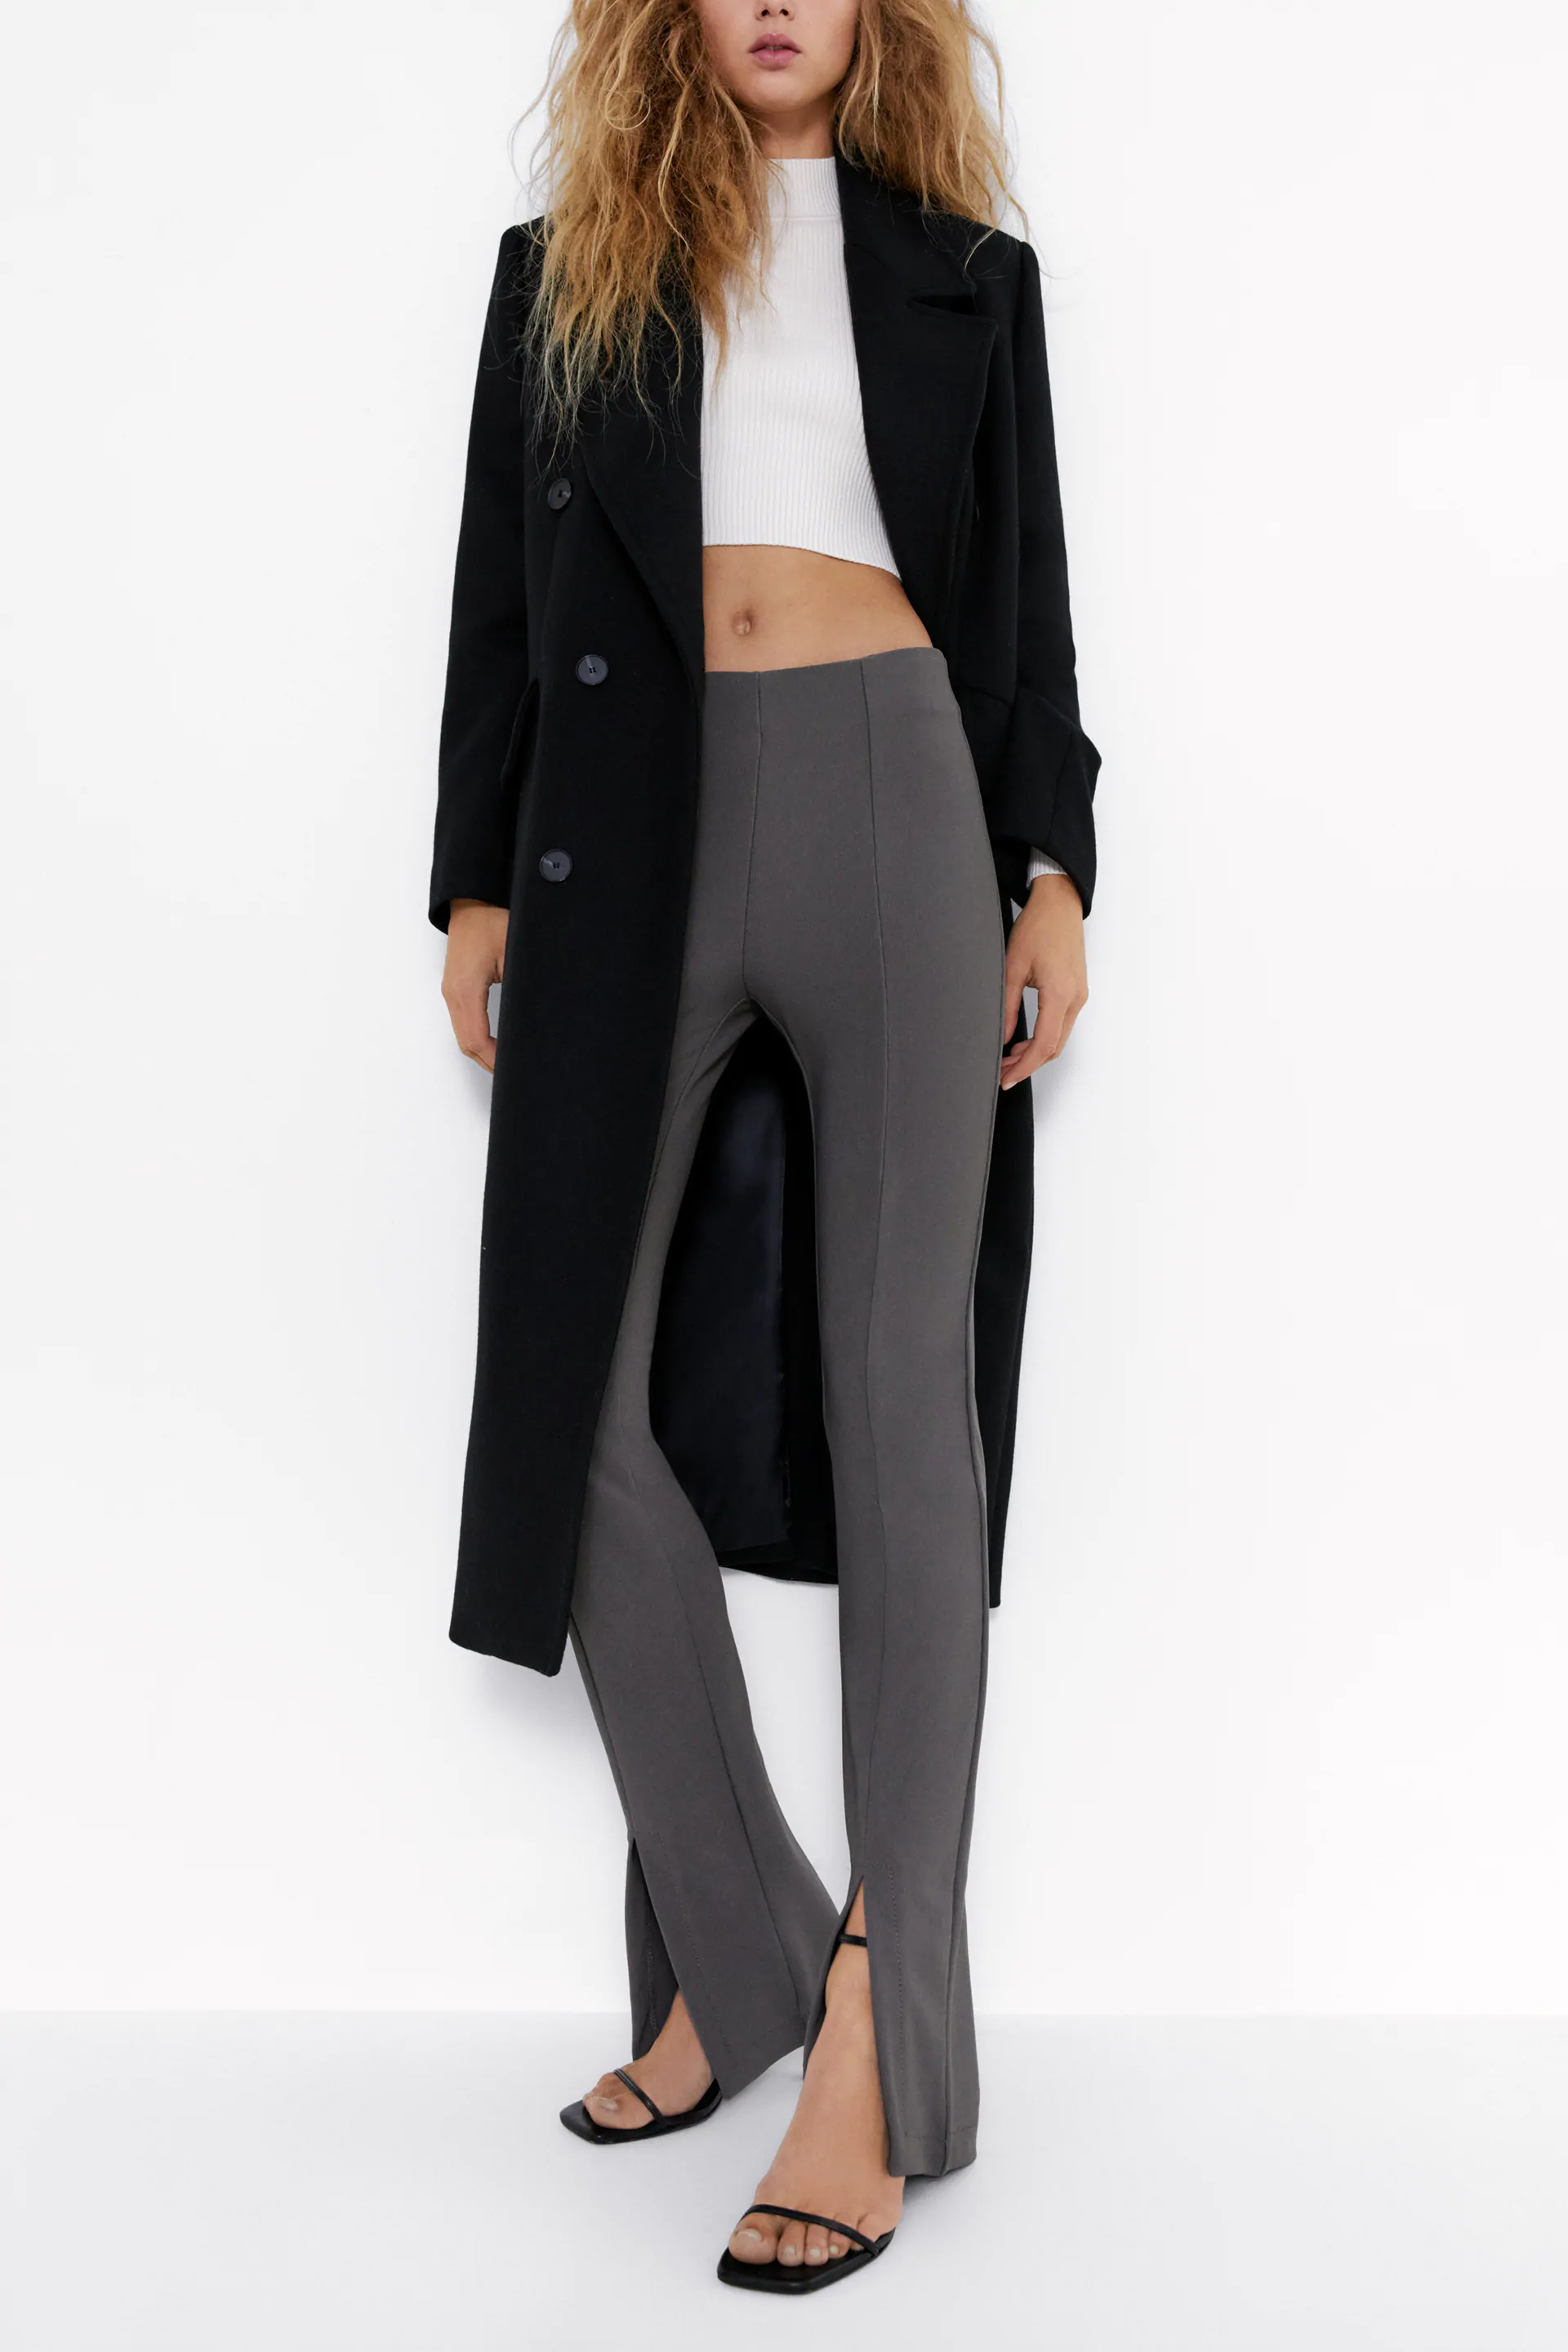 Zara Ribbed Leggings Co Order  International Society of Precision  Agriculture